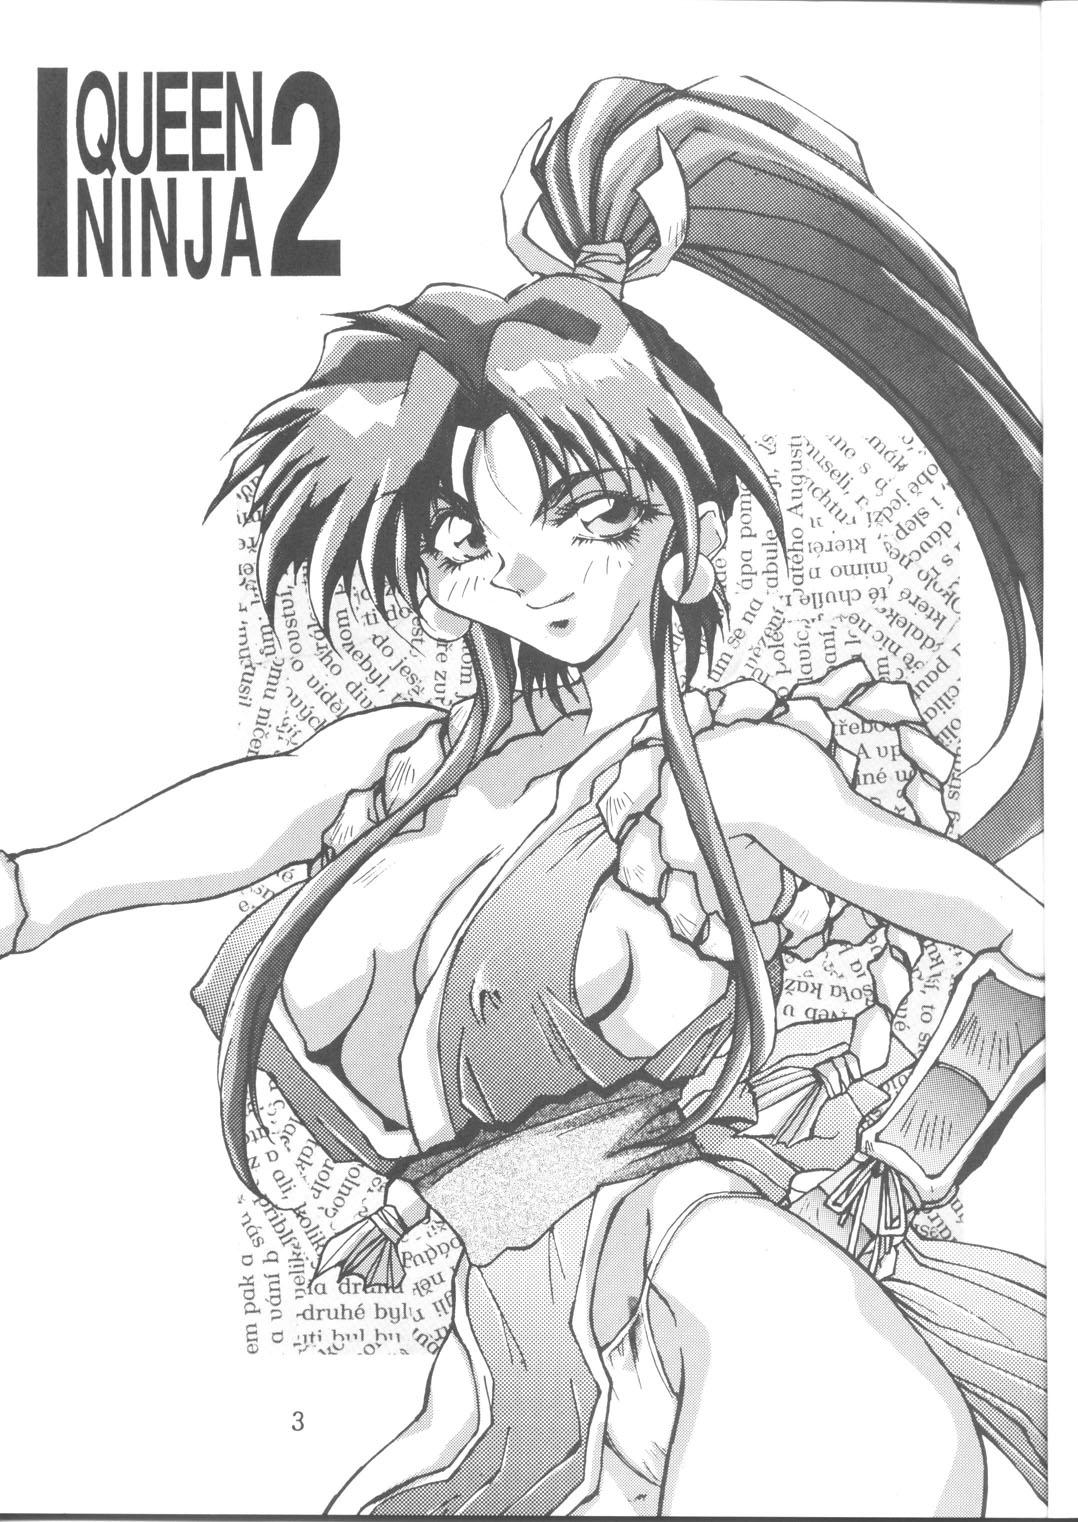 Topless Queen Ninja 2 - King of fighters Woman - Page 2